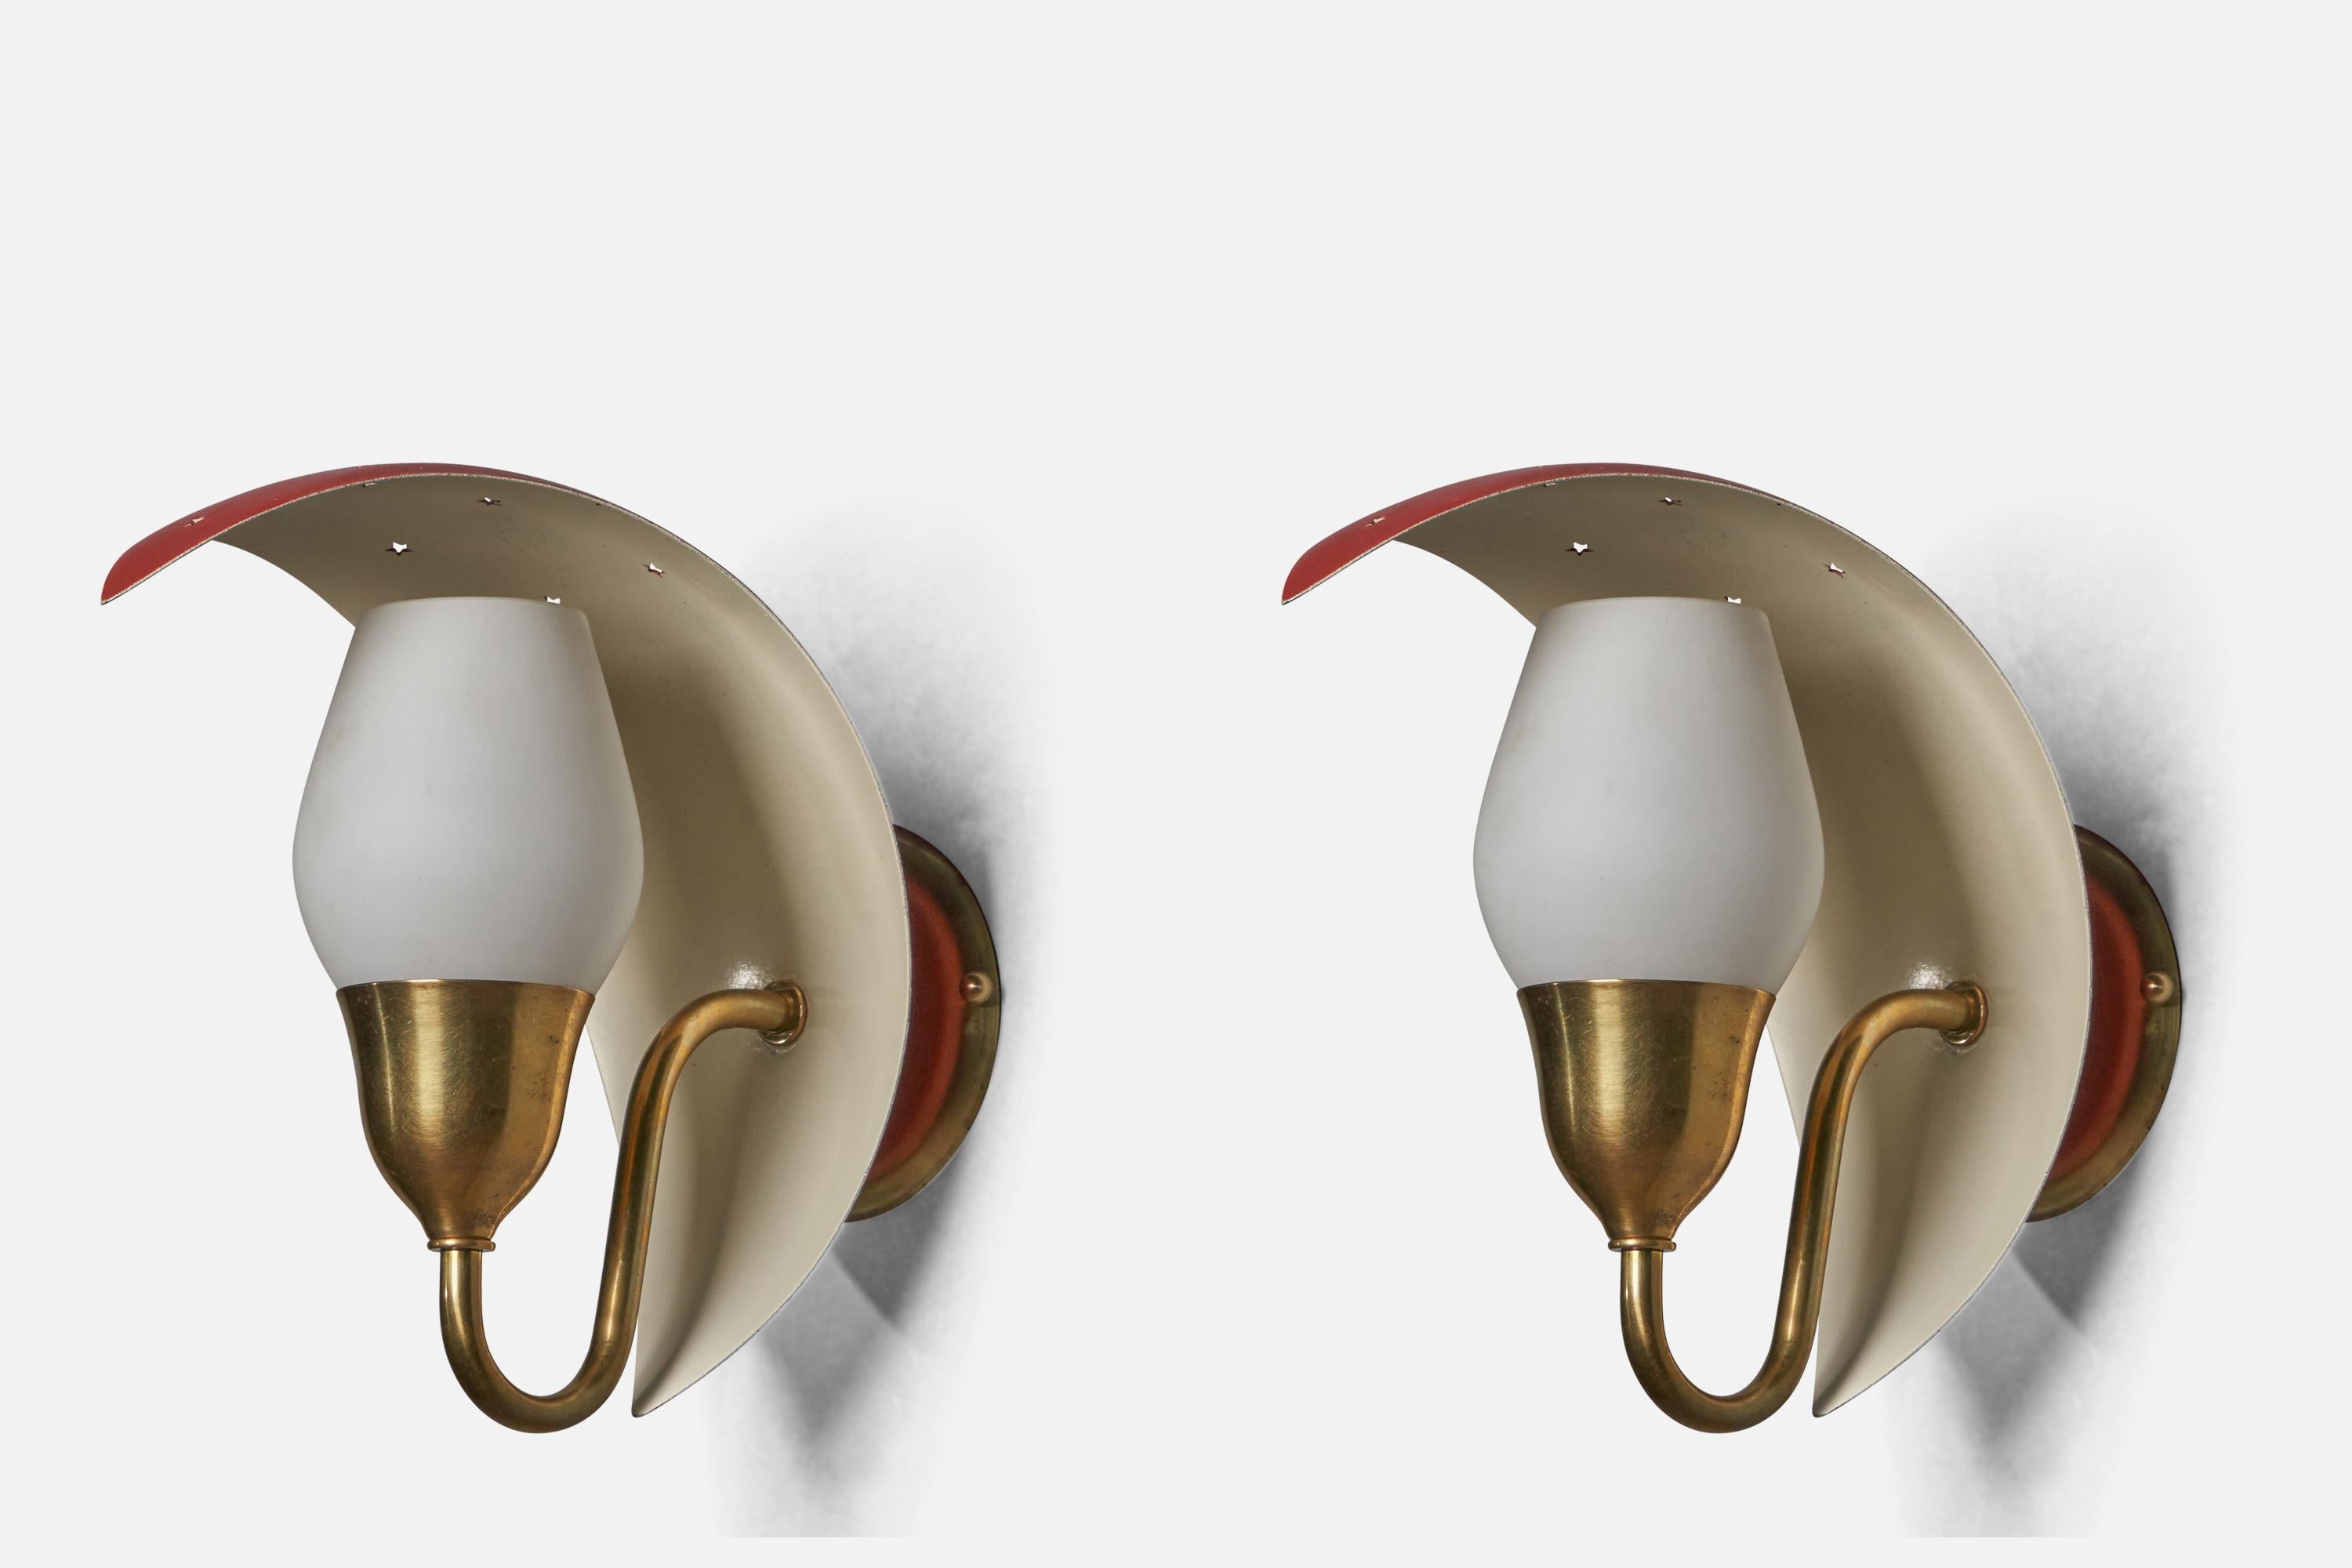 A pair of brass, red beige lacquered metal and opaline glass wall lights, designed by Bent Karlby and produced by Lyfa, Denmark, c. 1960s.

Overall Dimensions (inches): 9.25” H x 5.25” W x 8.75” D
Back Plate Dimensions (inches): 3.75” Diameter x